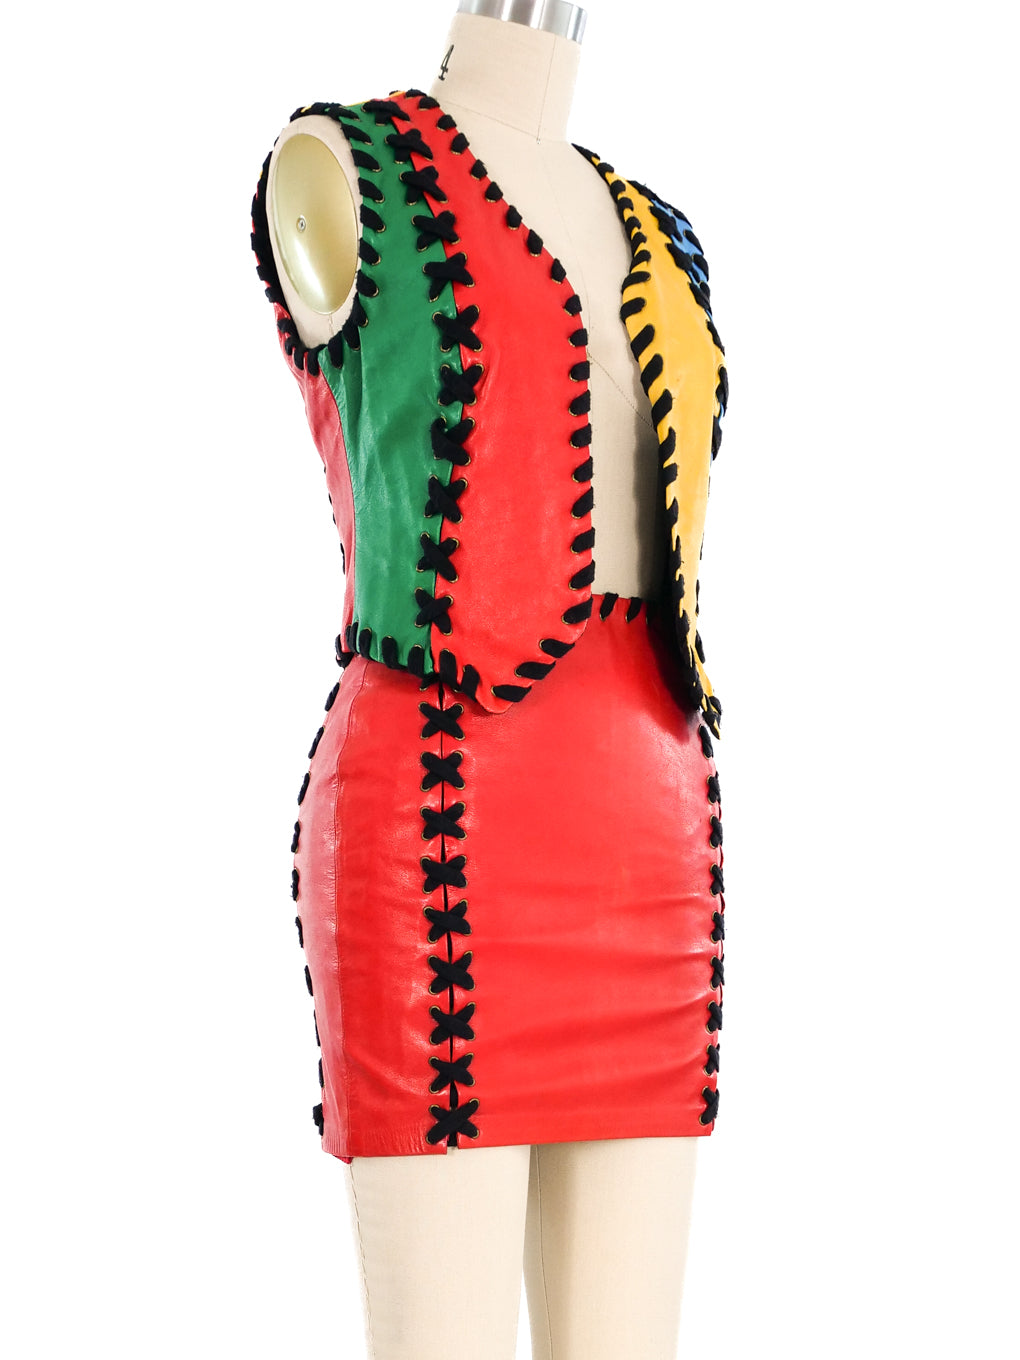 Moschino Colorblock Leather Ensemble